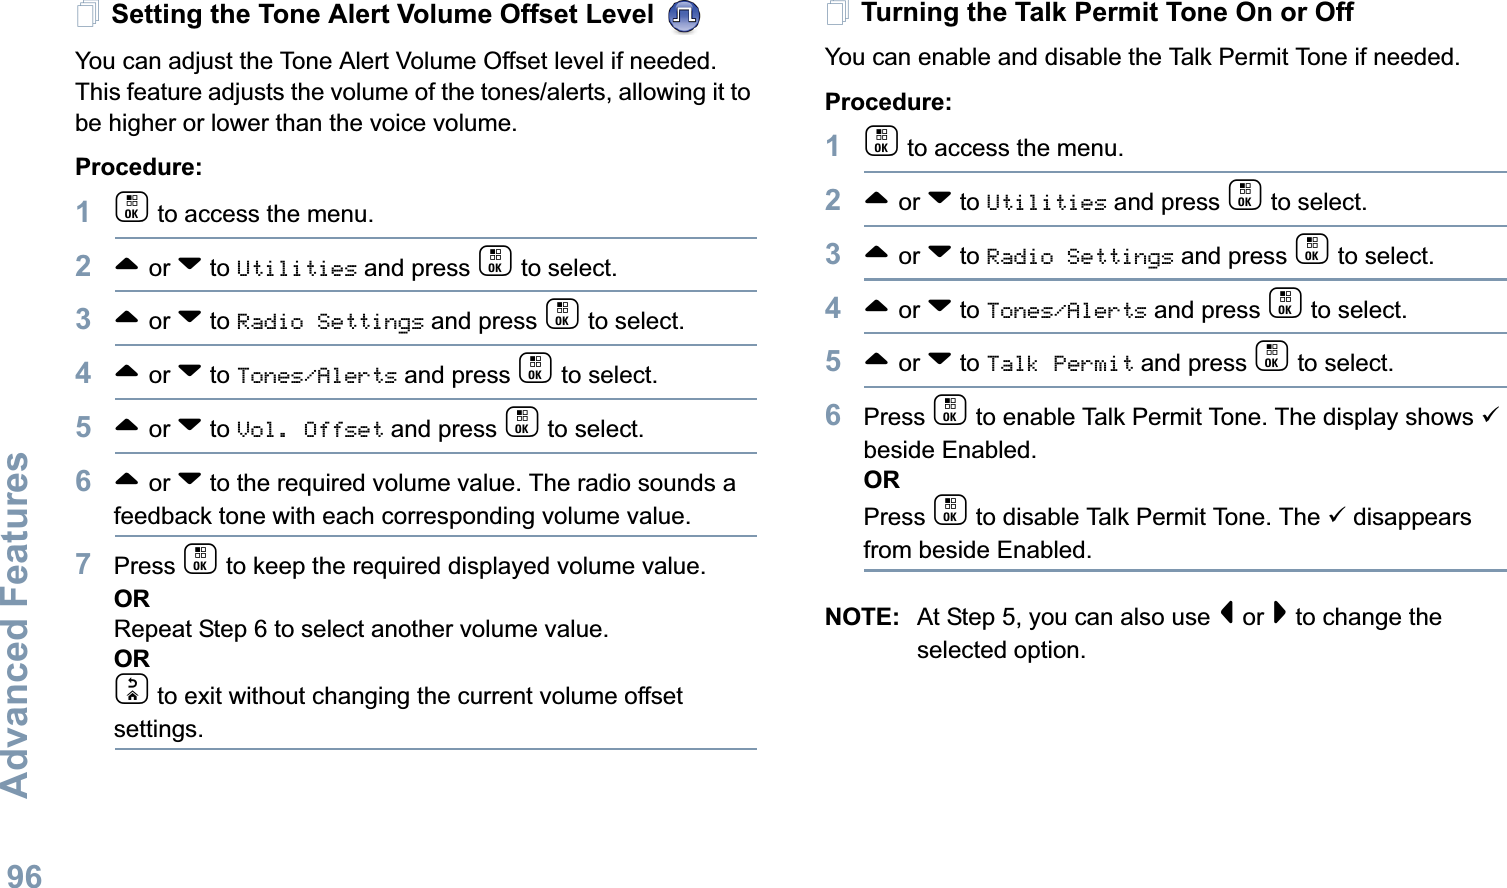 Advanced FeaturesEnglish96Setting the Tone Alert Volume Offset Level You can adjust the Tone Alert Volume Offset level if needed. This feature adjusts the volume of the tones/alerts, allowing it to be higher or lower than the voice volume.Procedure: 1c to access the menu.2^ or v to Utilities and press c to select.3^ or v to Radio Settings and press c to select.4^ or v to Tones/Alerts and press c to select.5^ or v to Vol. Offset and press c to select.6^ or v to the required volume value. The radio sounds a feedback tone with each corresponding volume value.7Press c to keep the required displayed volume value.  ORRepeat Step 6 to select another volume value.ORd to exit without changing the current volume offset settings.Turning the Talk Permit Tone On or Off You can enable and disable the Talk Permit Tone if needed.Procedure: 1c to access the menu.2^ or v to Utilities and press c to select.3^ or v to Radio Settings and press c to select.4^ or v to Tones/Alerts and press c to select.5^ or v to Talk Permit and press c to select.6Press c to enable Talk Permit Tone. The display shows 9 beside Enabled.ORPress c to disable Talk Permit Tone. The 9 disappears from beside Enabled.NOTE: At Step 5, you can also use &lt; or &gt; to change the selected option.